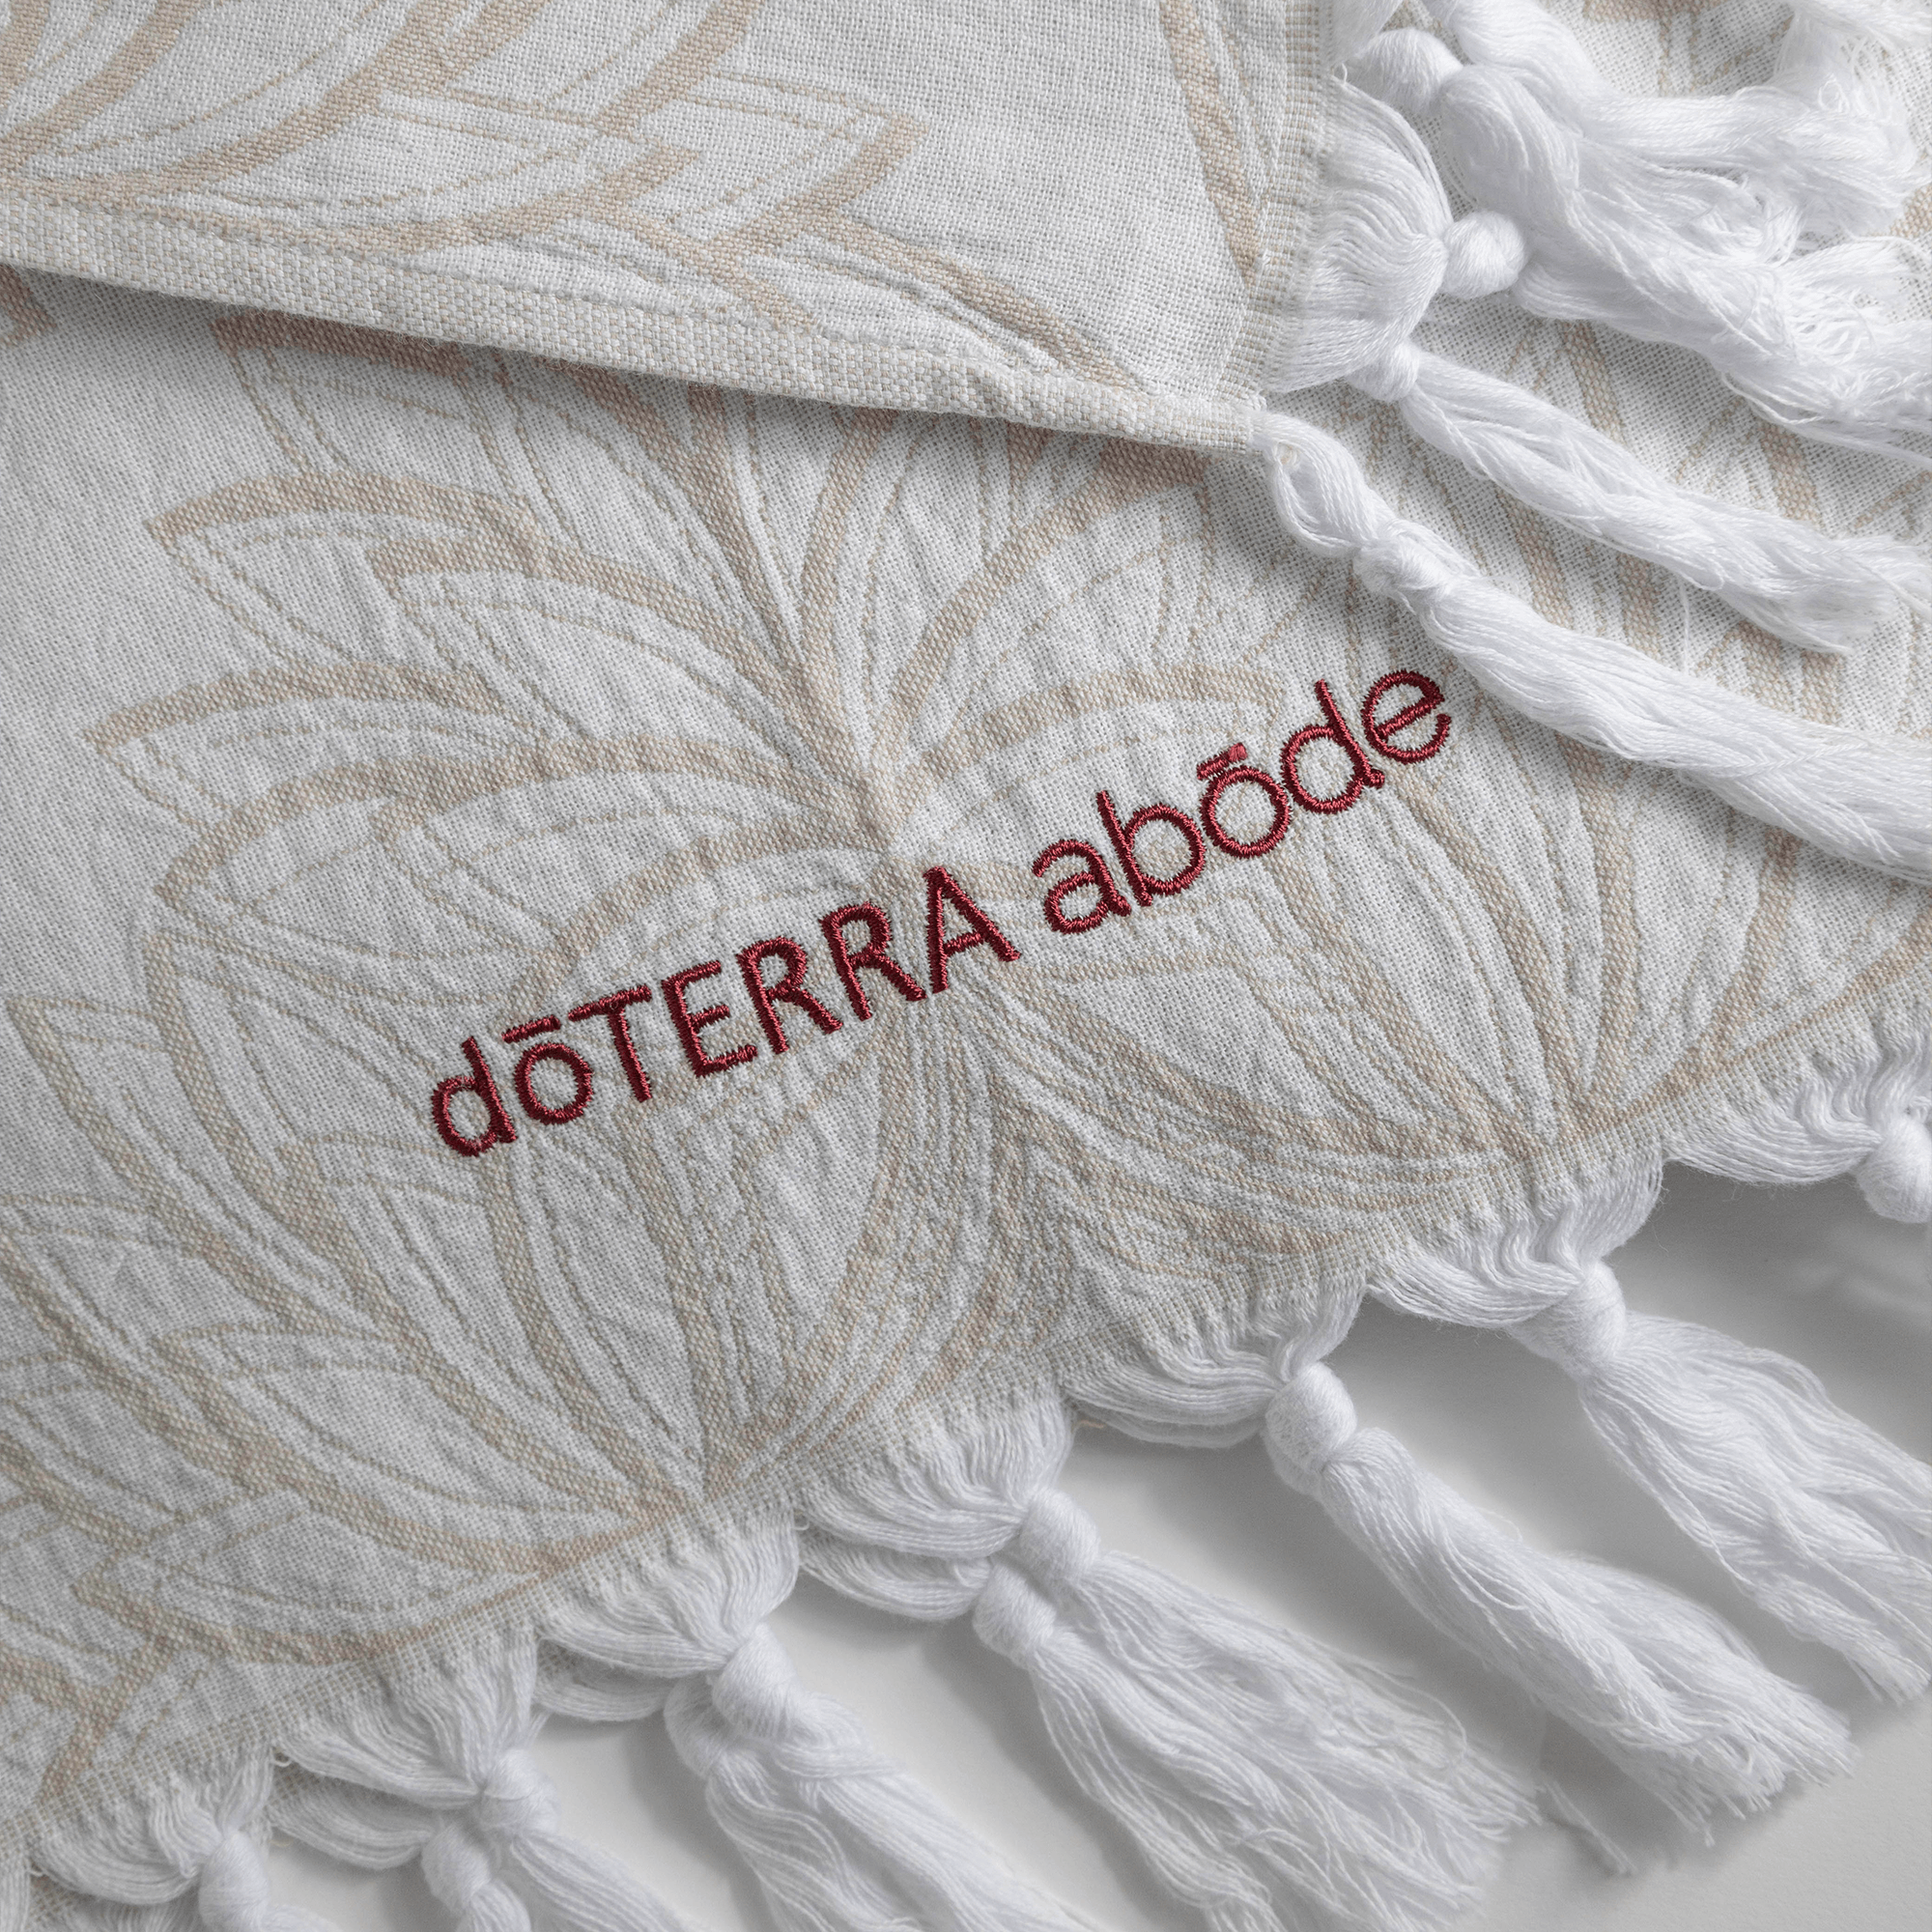 Custom doTerra hand towels with the doTERRA abode logo embroidered onto the hand towels. Custom Turkish cotton hand towels for marketing merchandise towards a recognition program